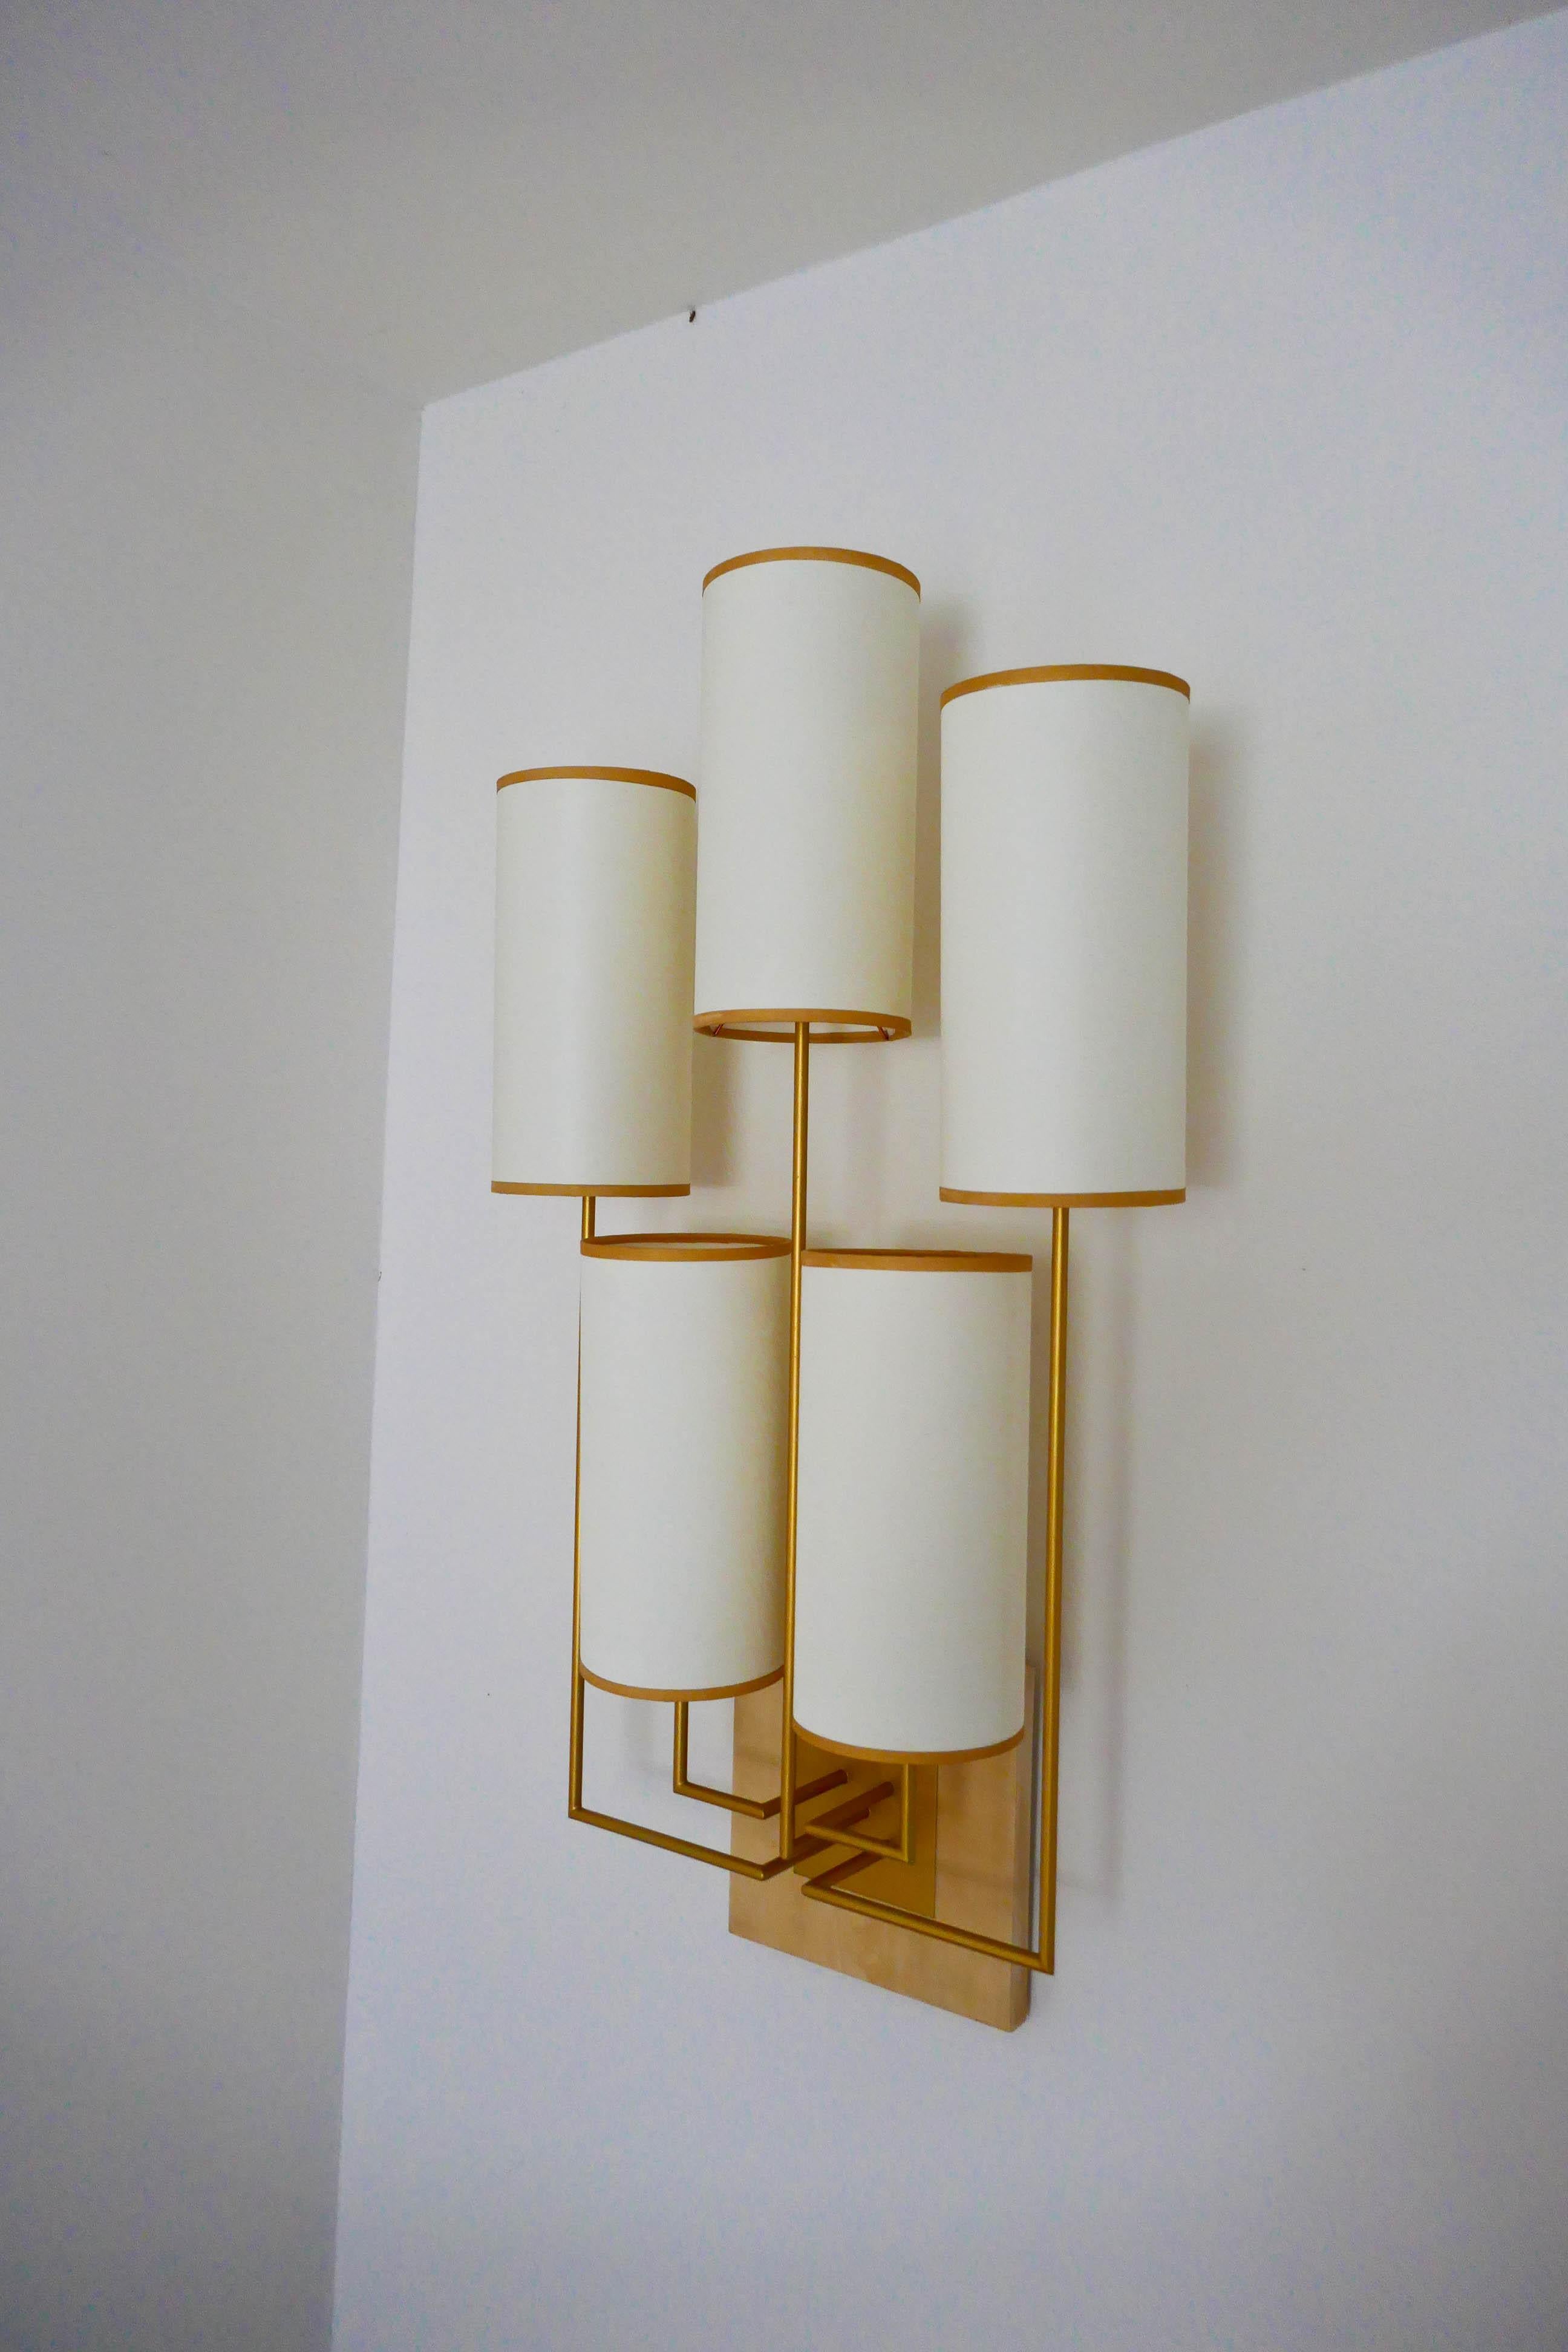 Pair of Wall Lamp Sconce in Gold Patina and White Fabric Lamp Shades For Sale 5